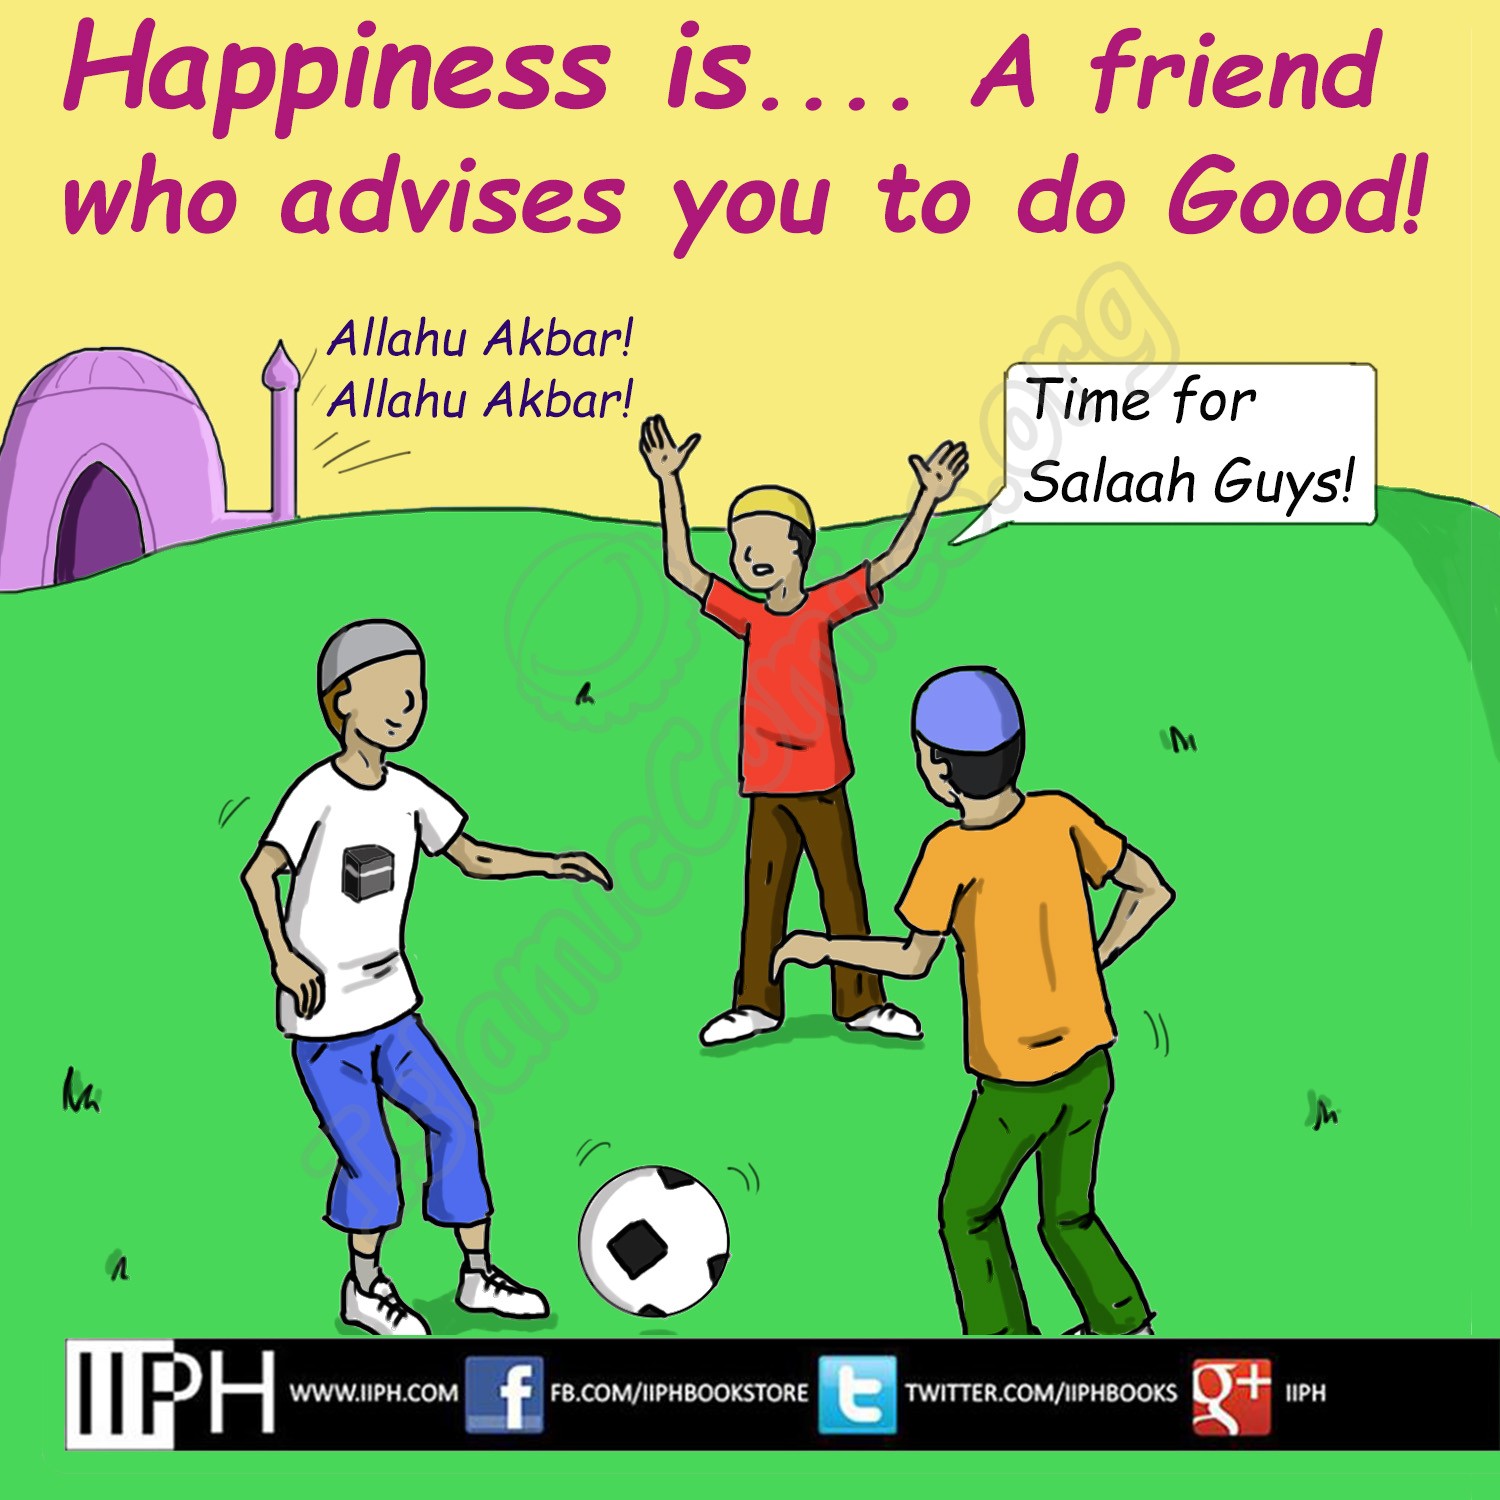 Happiness is a friend who advises you to do good - Islamic Illustrations (Islamic Comics)